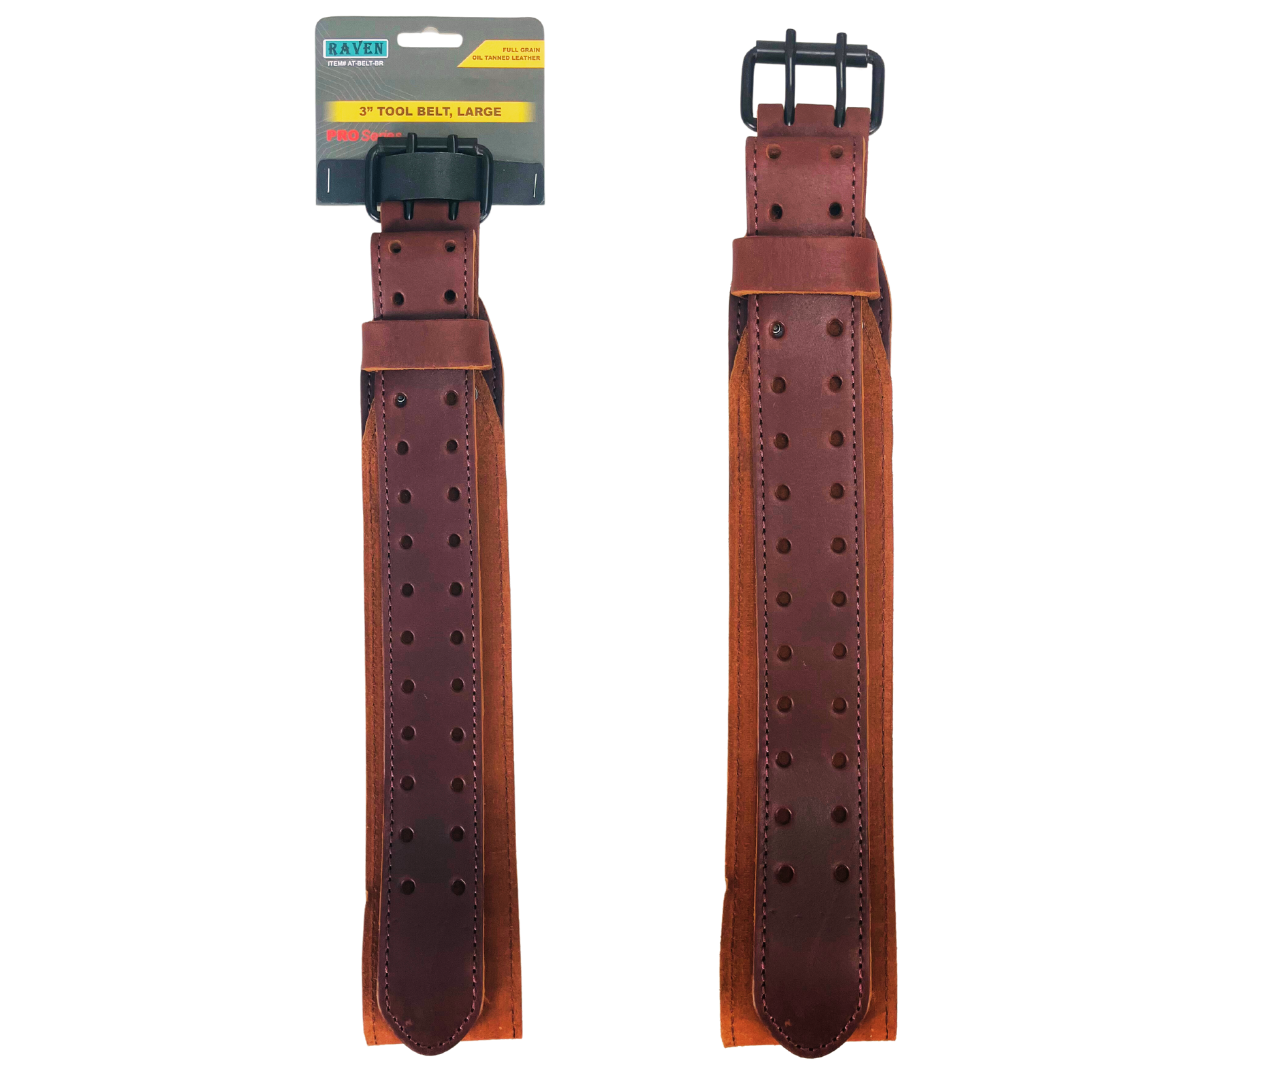 3" Brown Work Tool Belt in Oil Tanned Full Grain Leather | Heavy Duty - Durable and Rugged | PRO Series